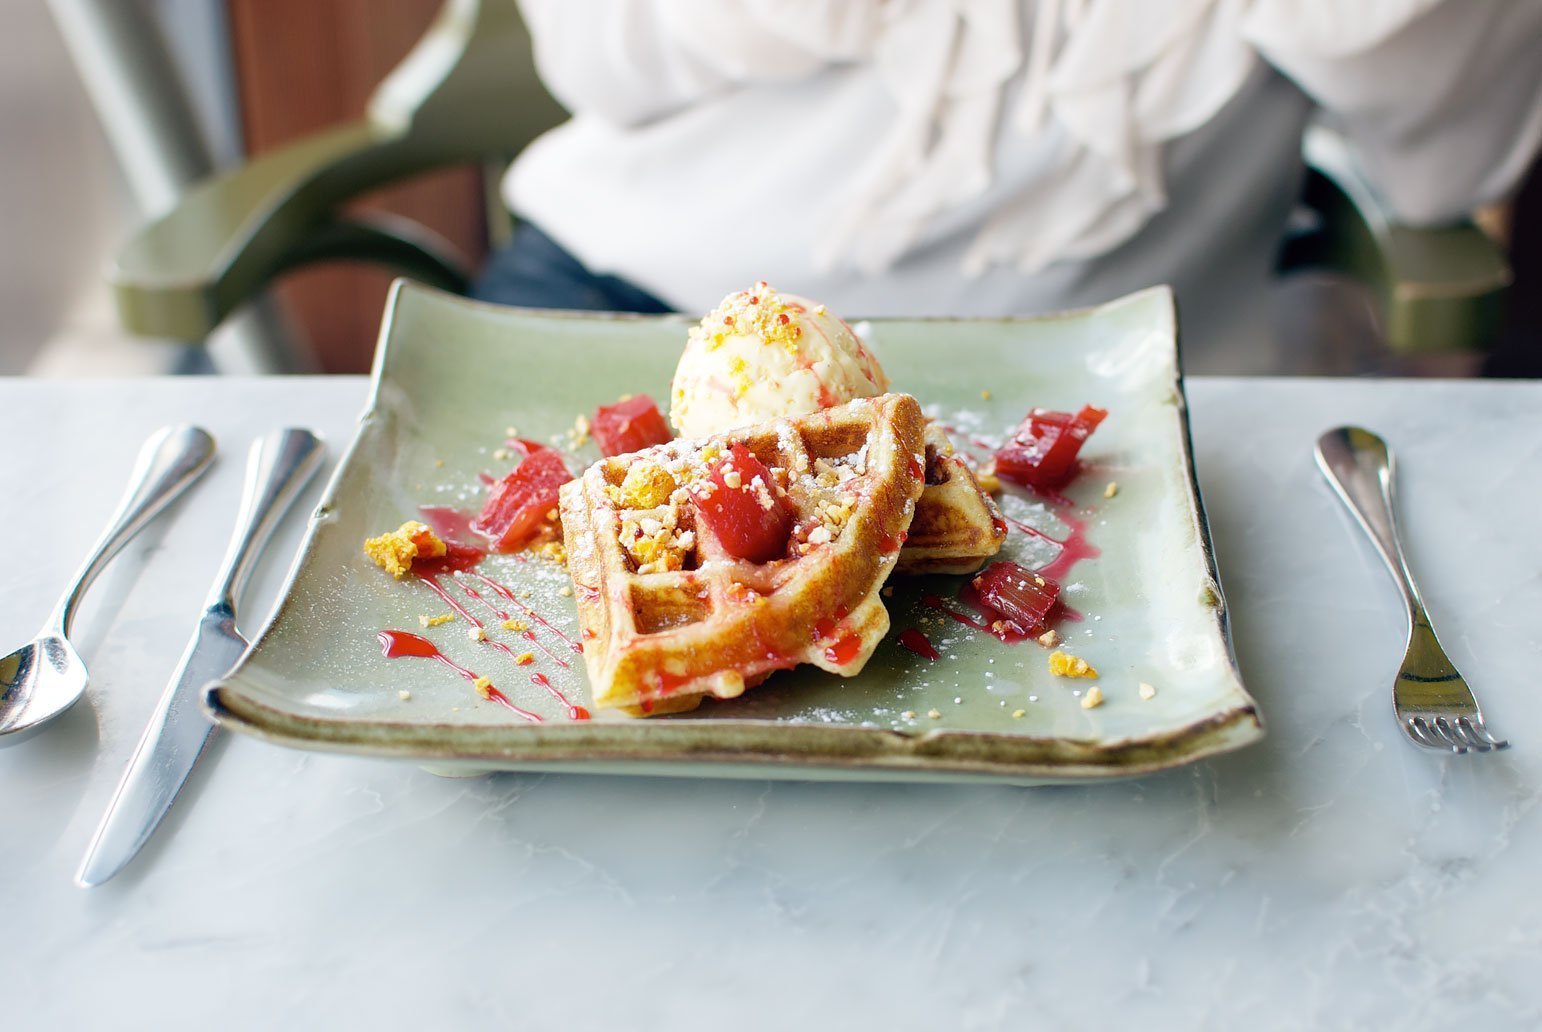 Belgian waffle with poached rhubarb at Duck & Waffle in London.